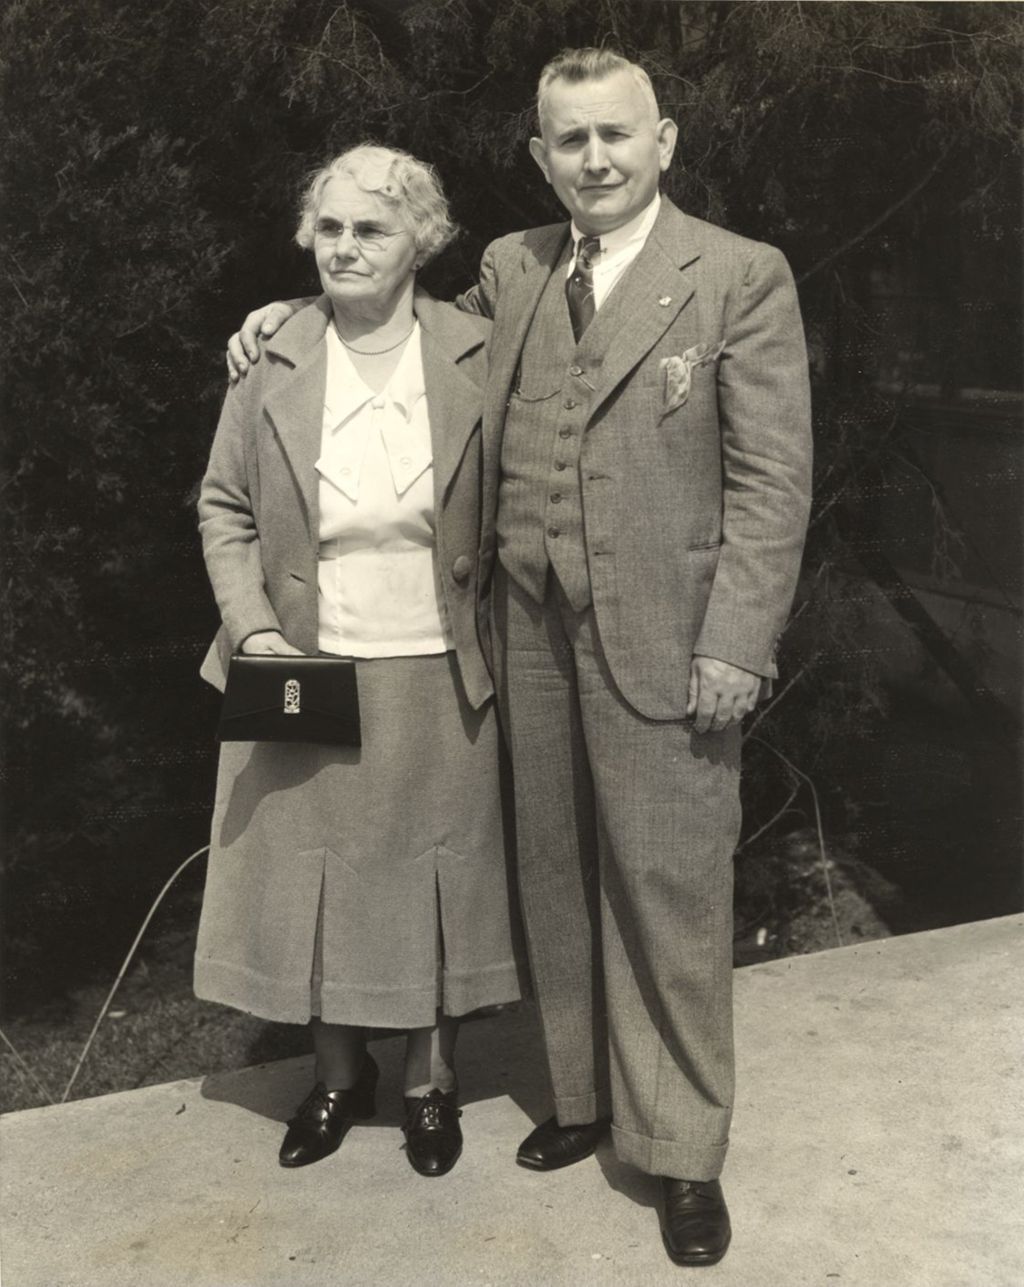 Miniature of Brother and sister reunite at the Chicago World's Fair